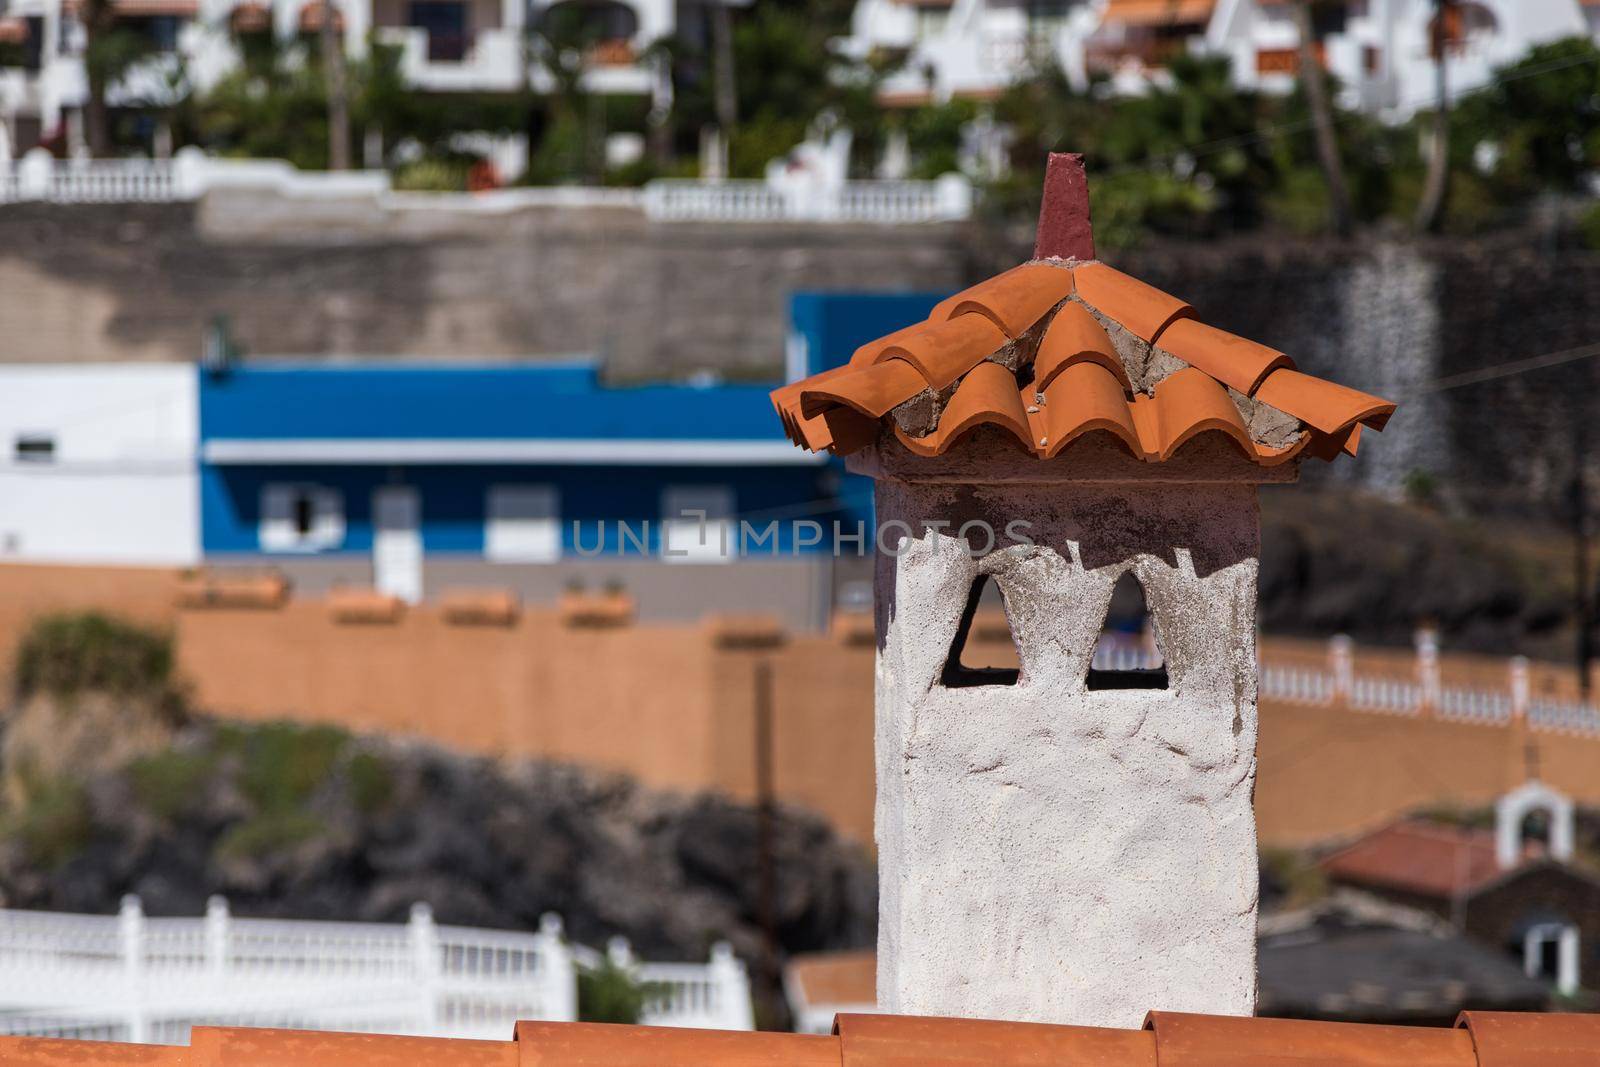 Orange shingle roof with chimney in mediterranean style, buildings at the background